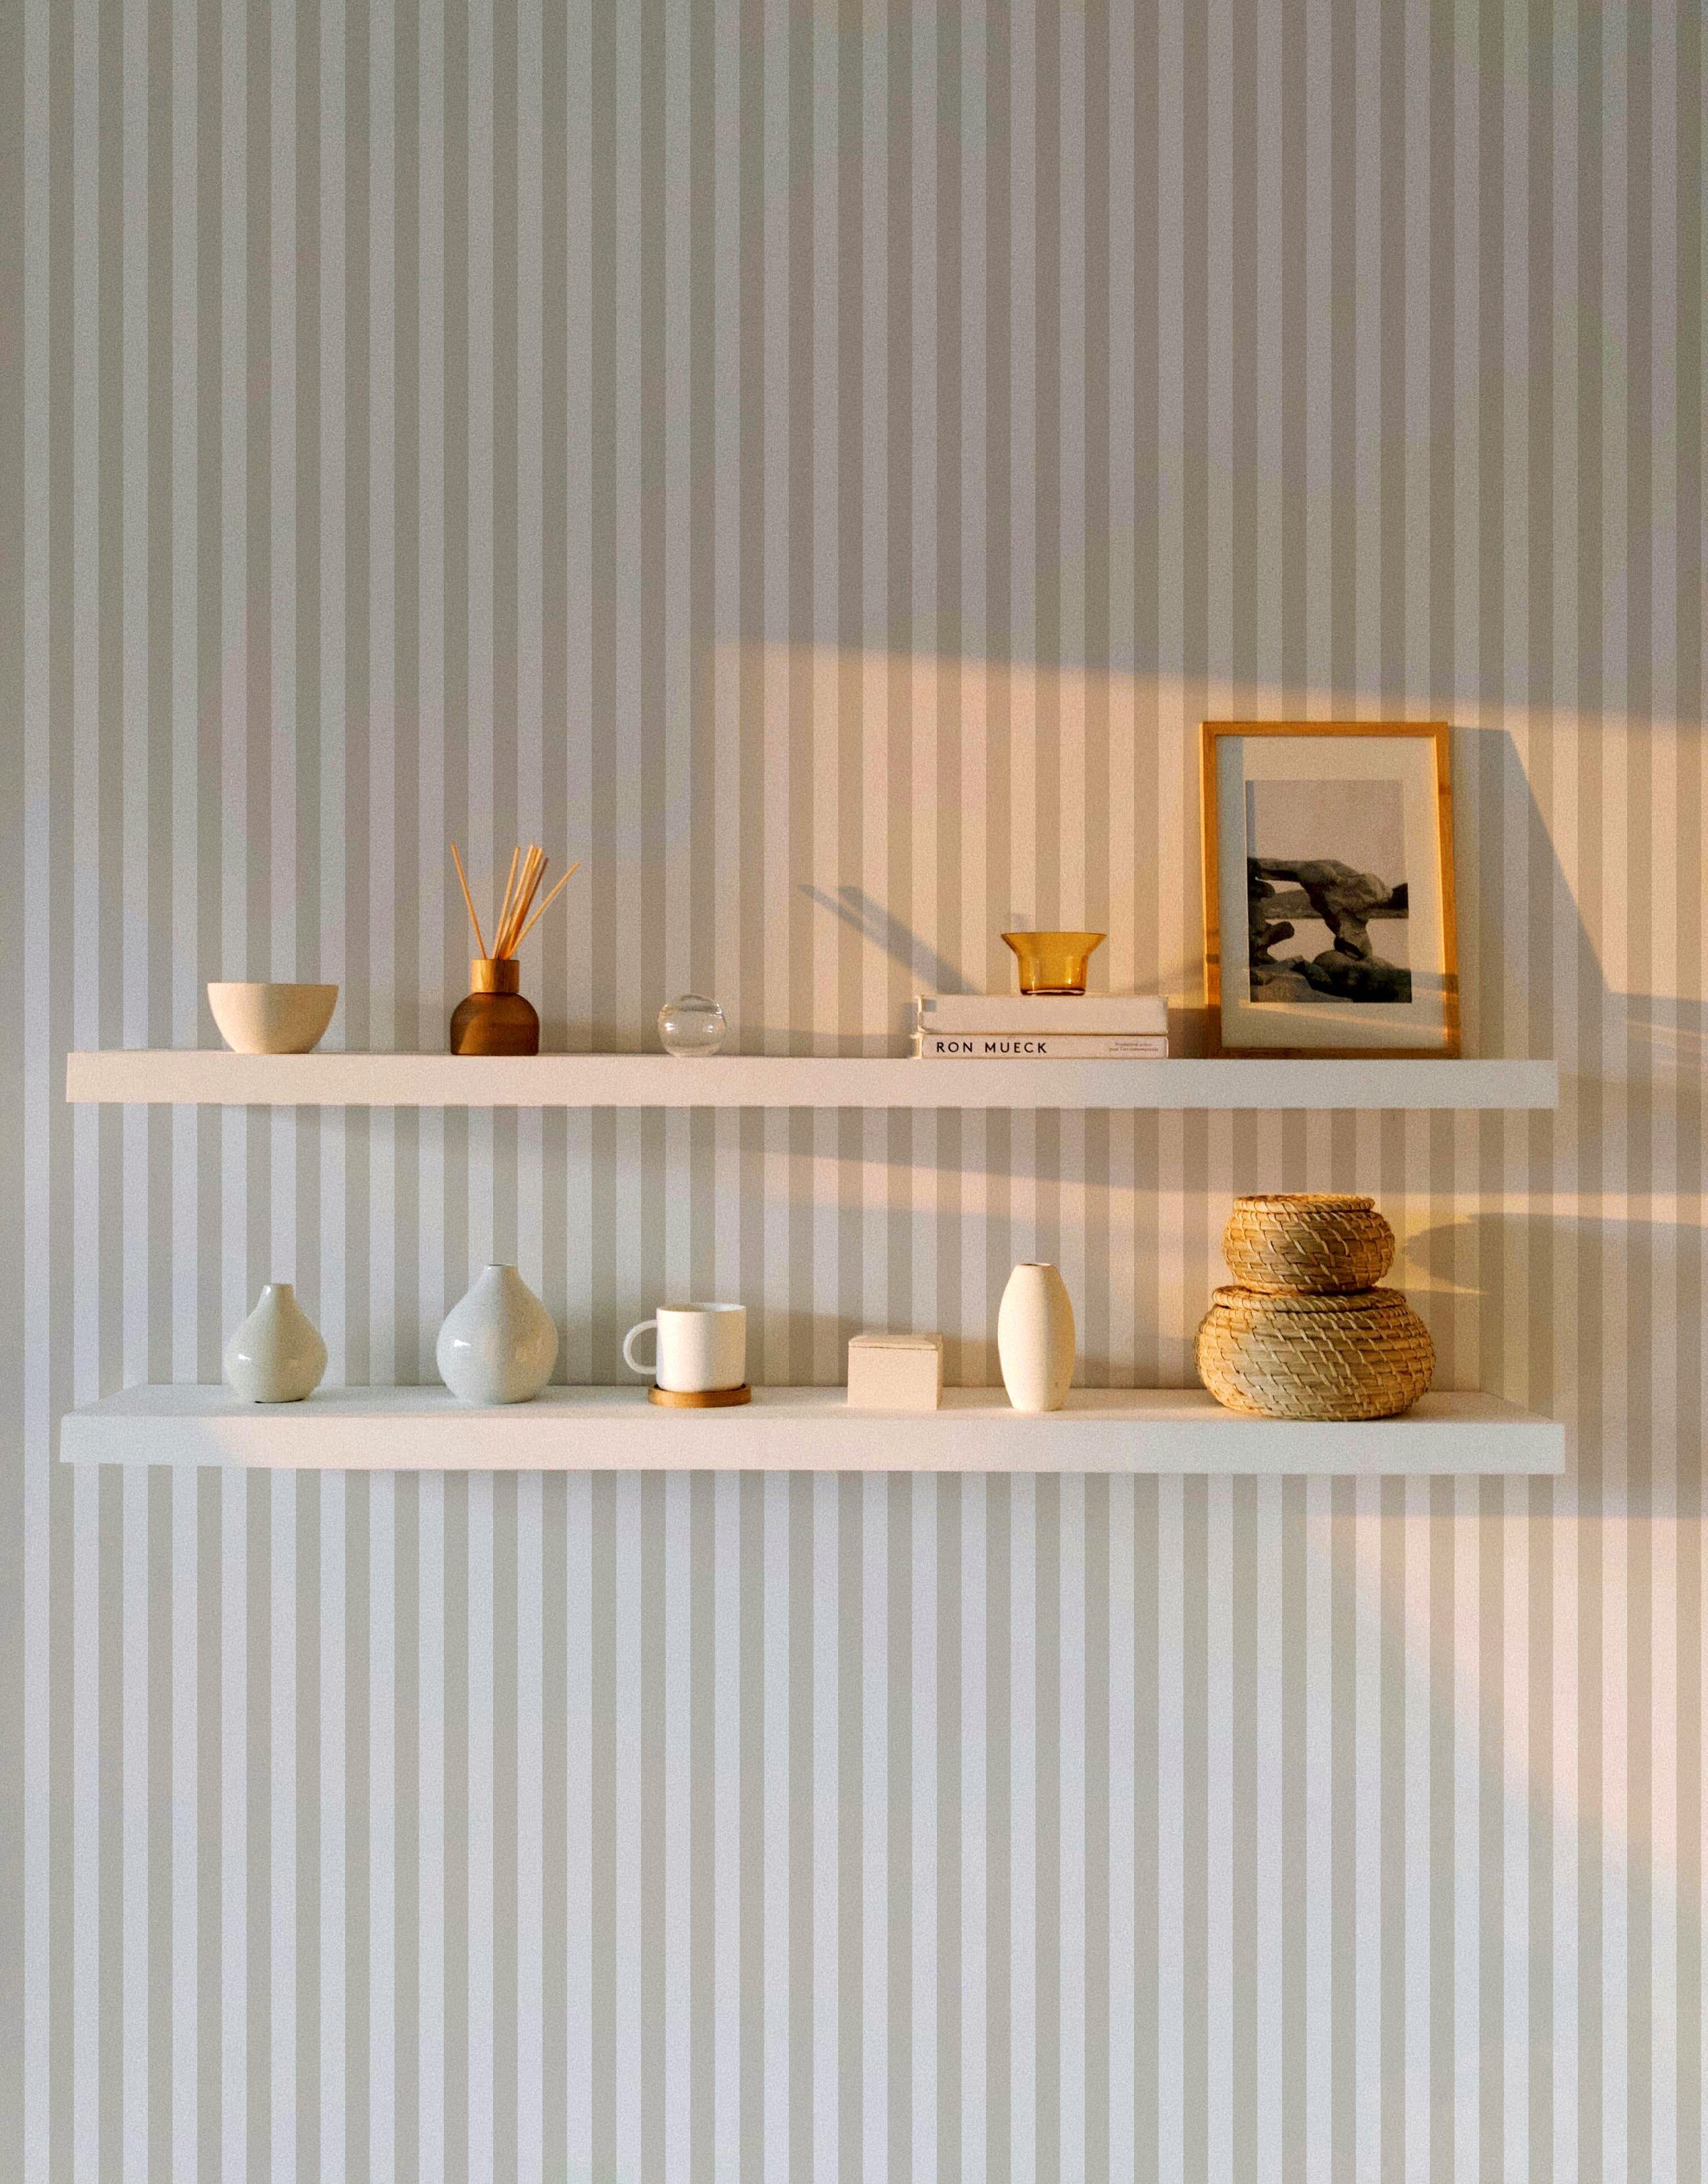 A minimalistic room with Anne Stripe Wallpaper featuring vertical beige and white stripes. Two white floating shelves hold various decor items, including ceramics, books, and a framed photo, with soft sunlight casting shadows.